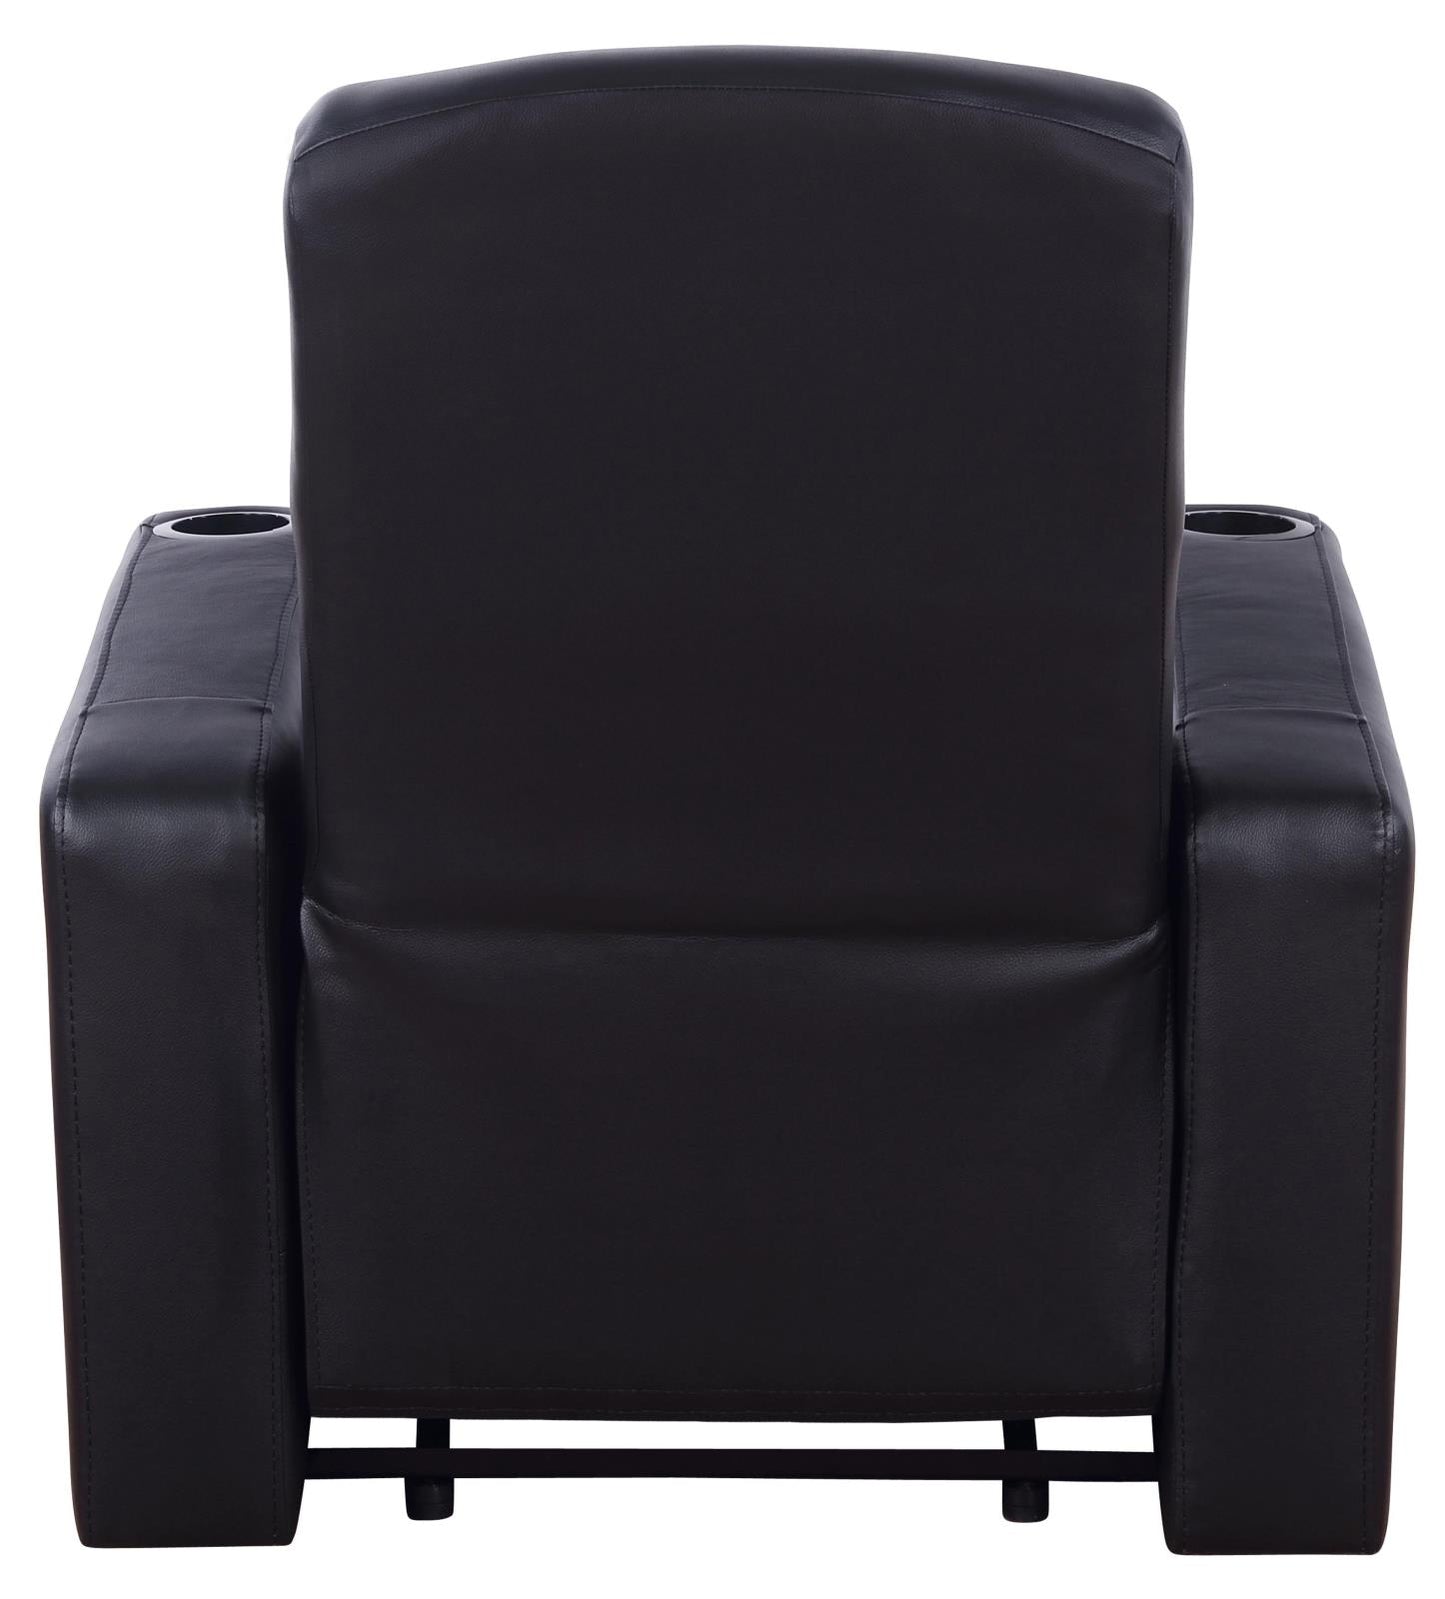 Cyrus - 5 PC THEATER SEATING (4R)